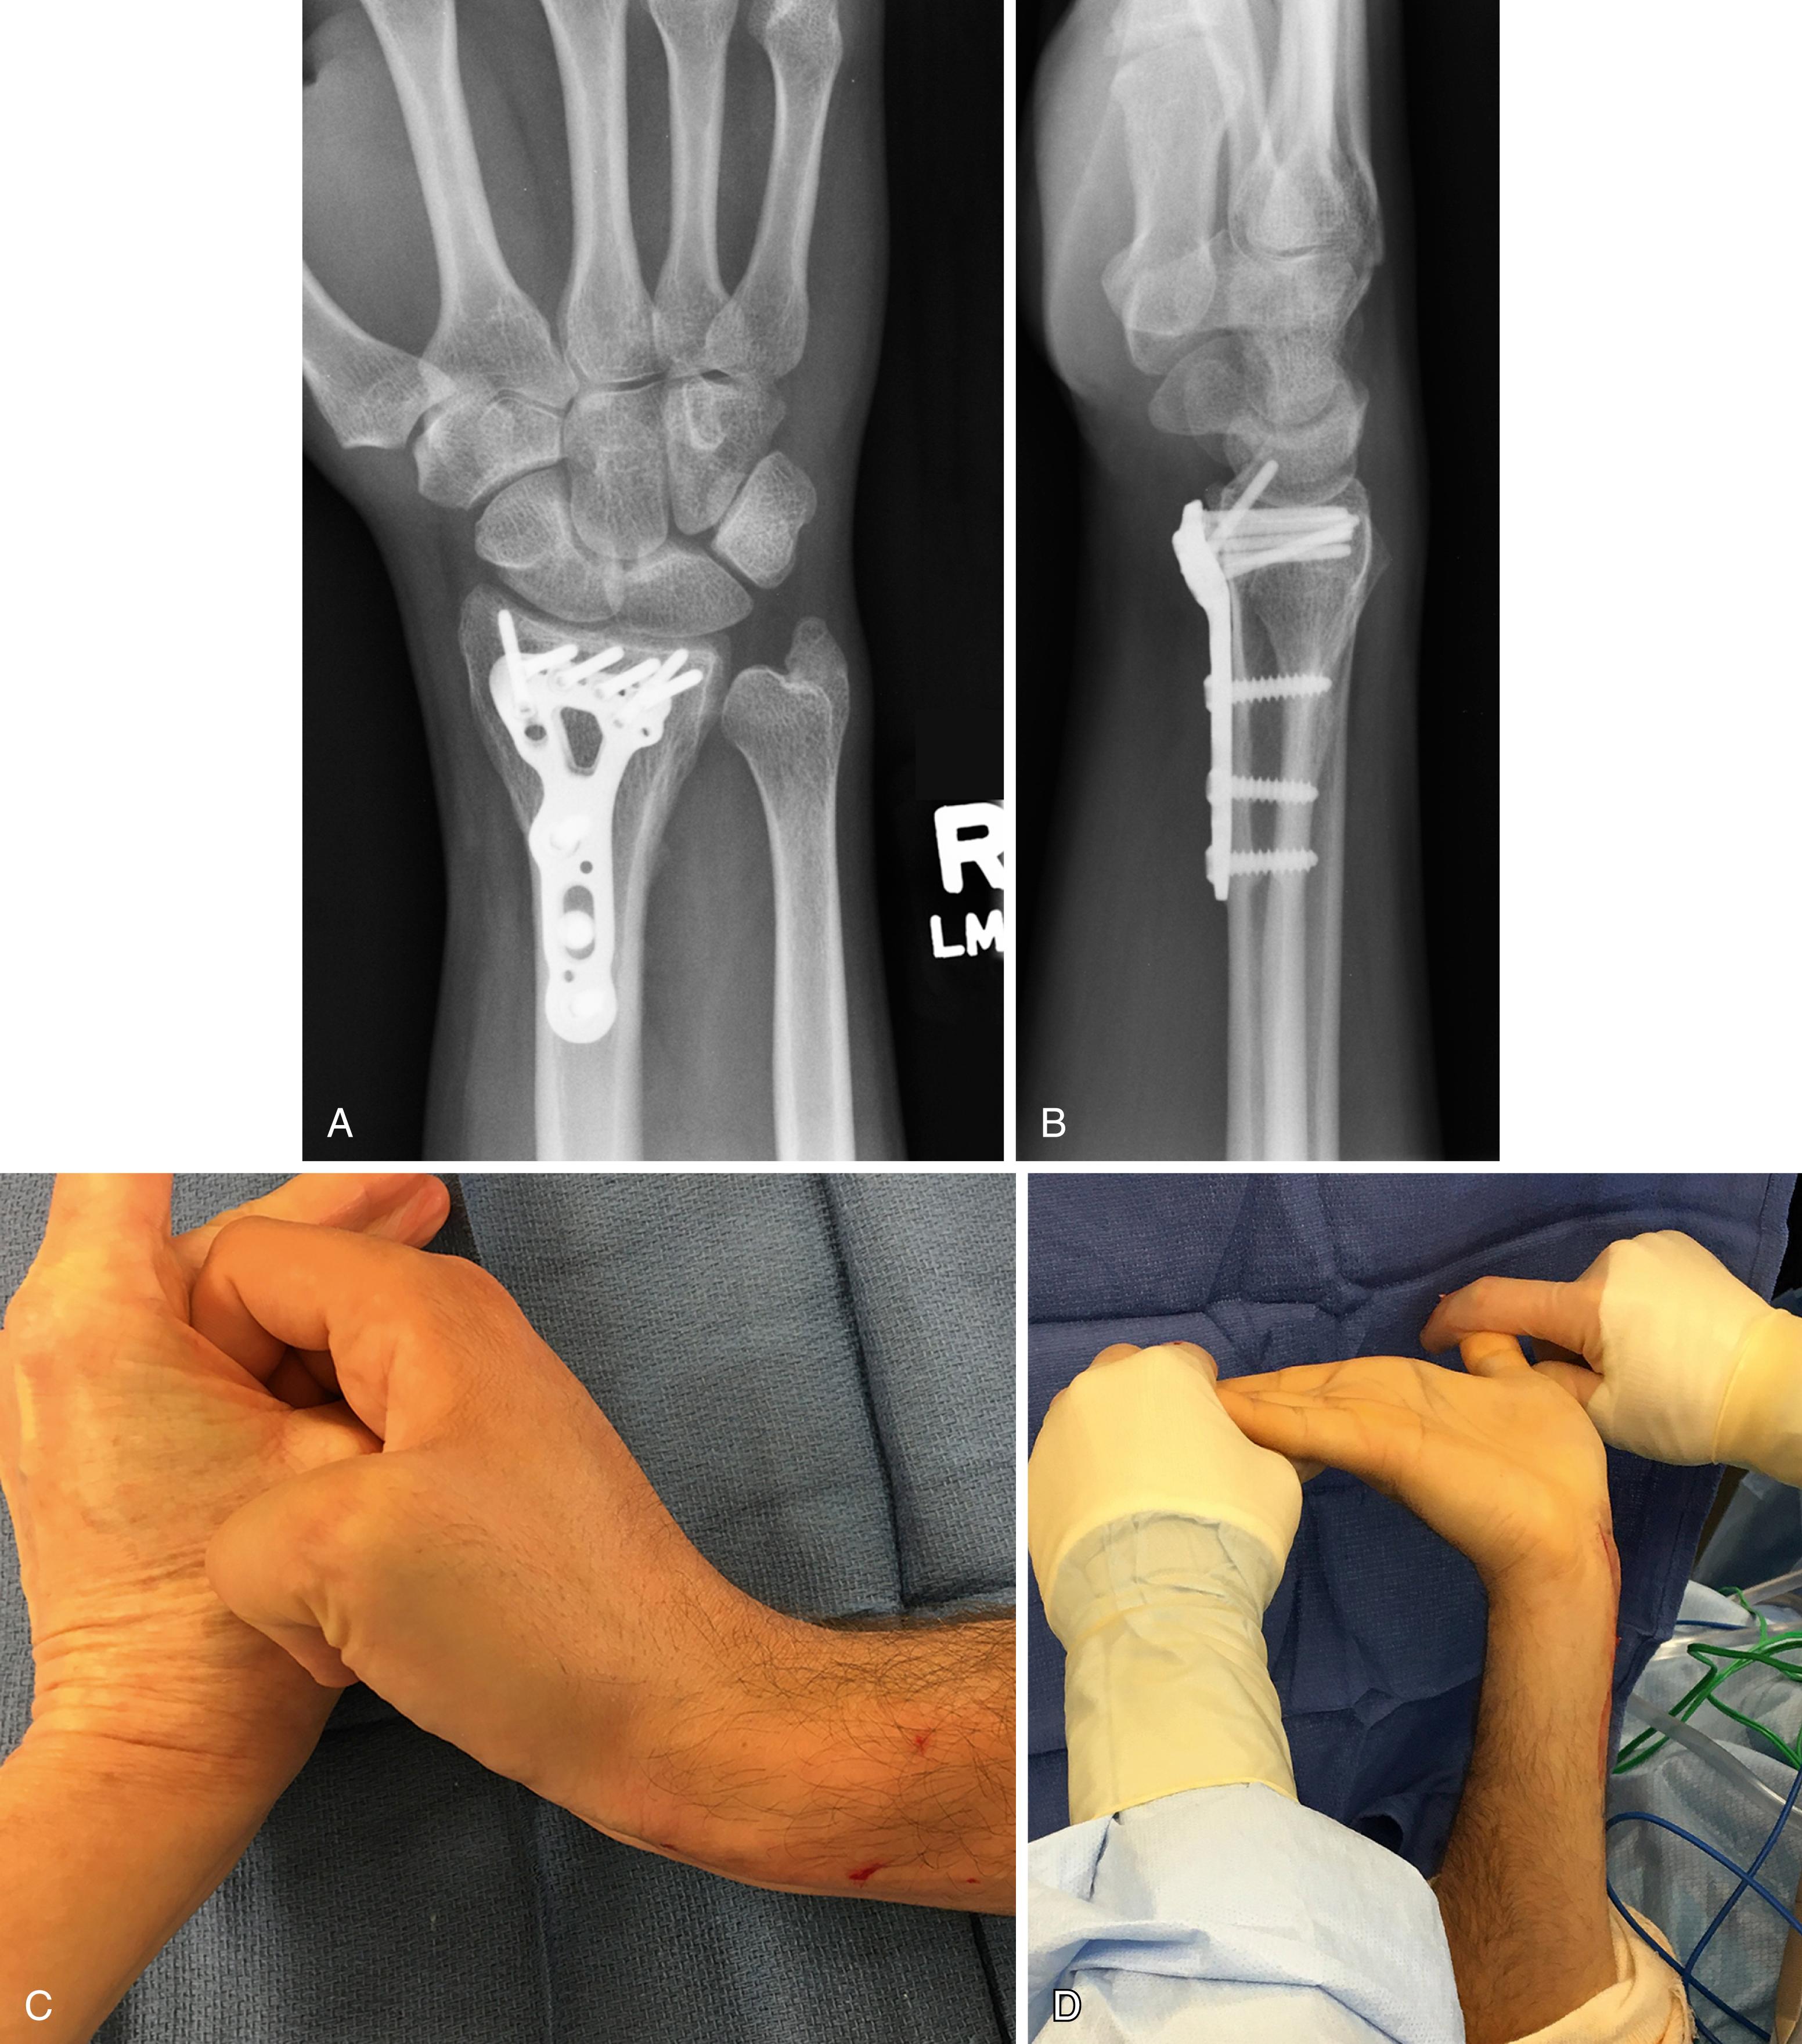 eFig. 51.1, Pseudo-Volkmann’s contracture. A and B, Preoperative imaging injury. C, Preoperative passive finger extension with wrist in neutral. D, Intraoperative full passive extension of wrist and fingers.